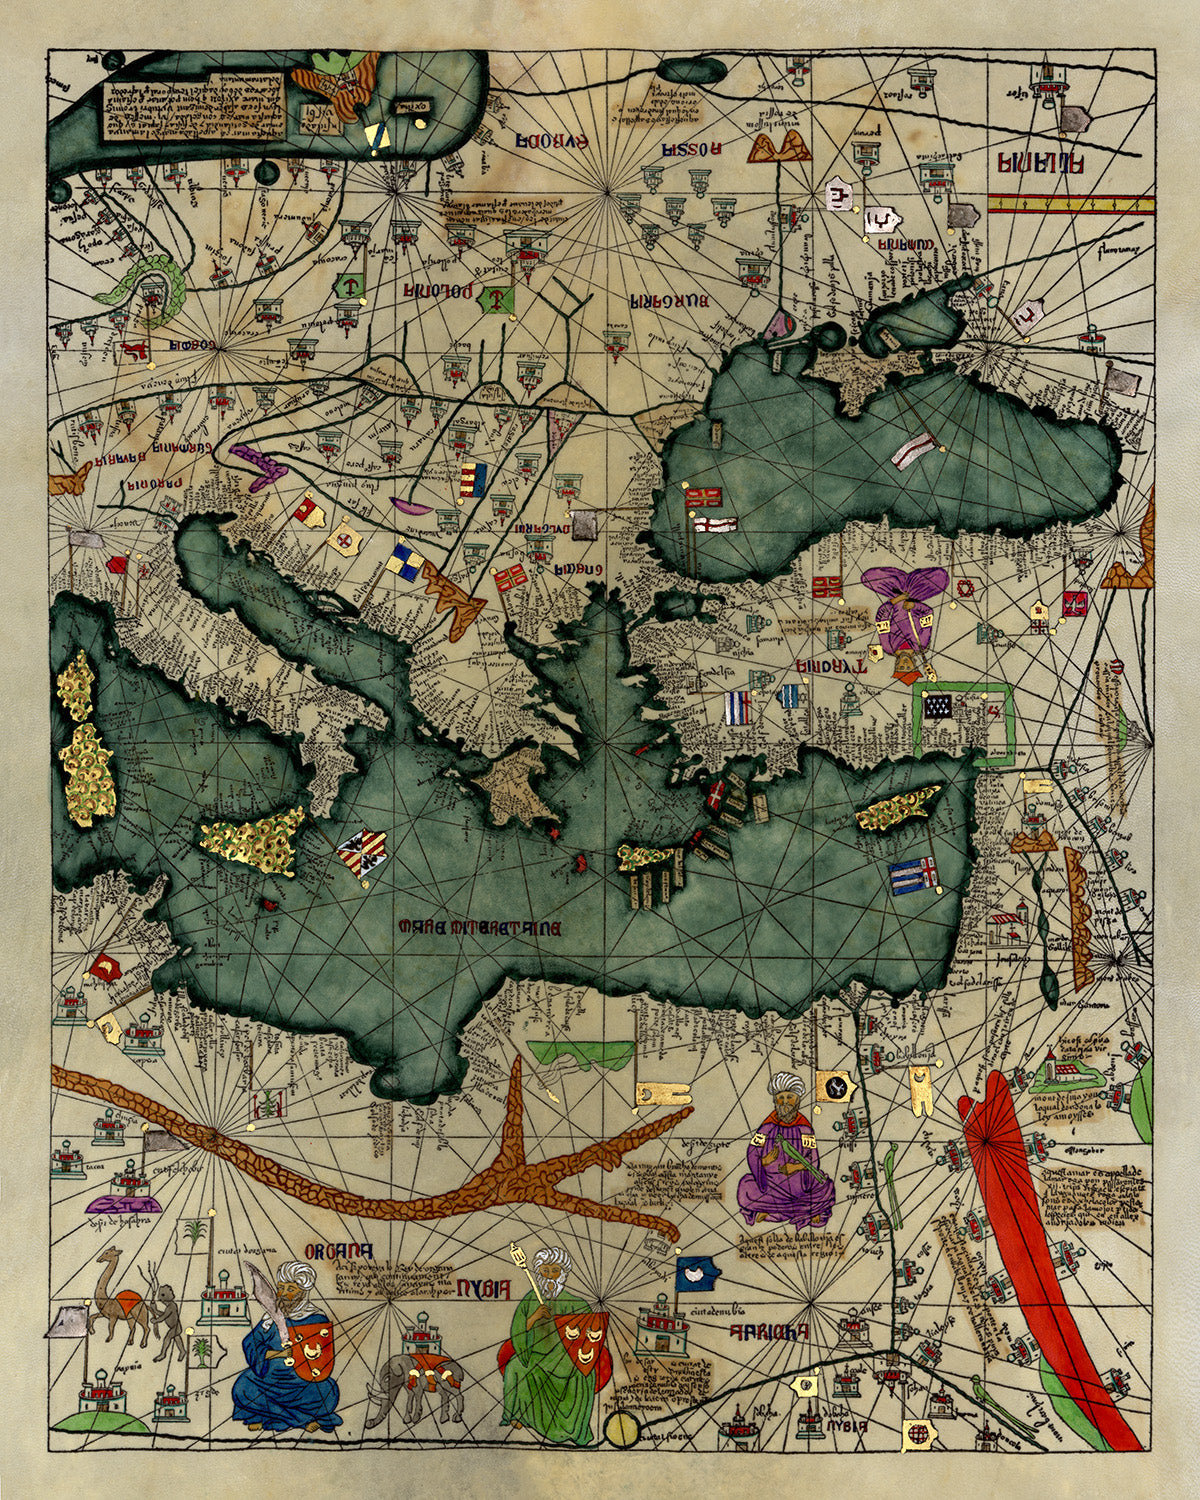 Old Catalan Atlas 1375 Europe Mediterranean Sea and Middle East - VINTAGE  MAPS AND PRINTS